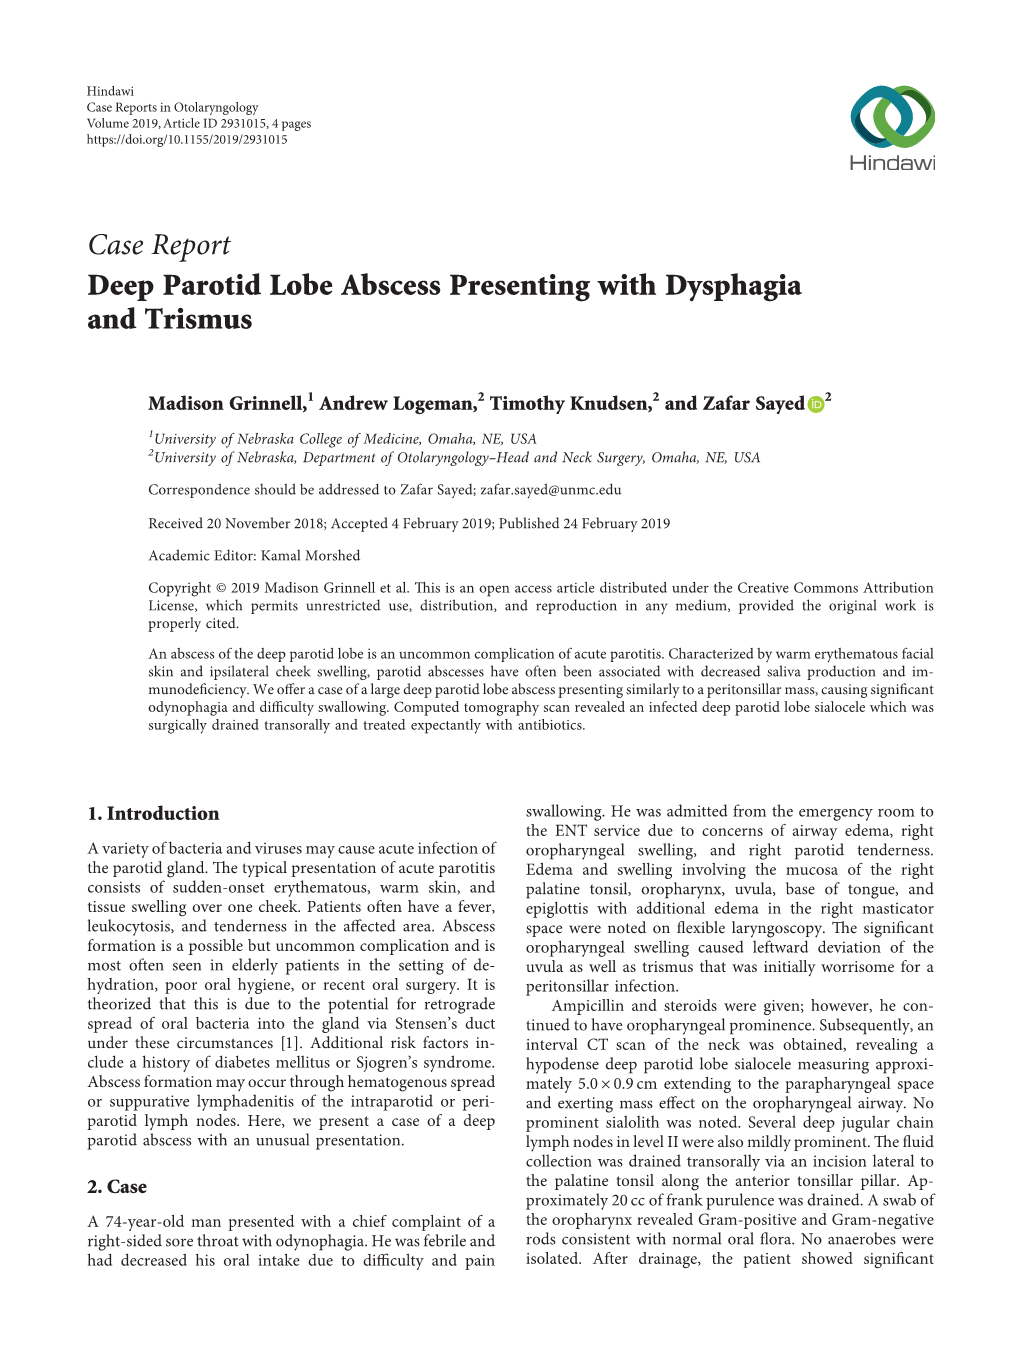 Case Report Deep Parotid Lobe Abscess Presenting with Dysphagia and Trismus